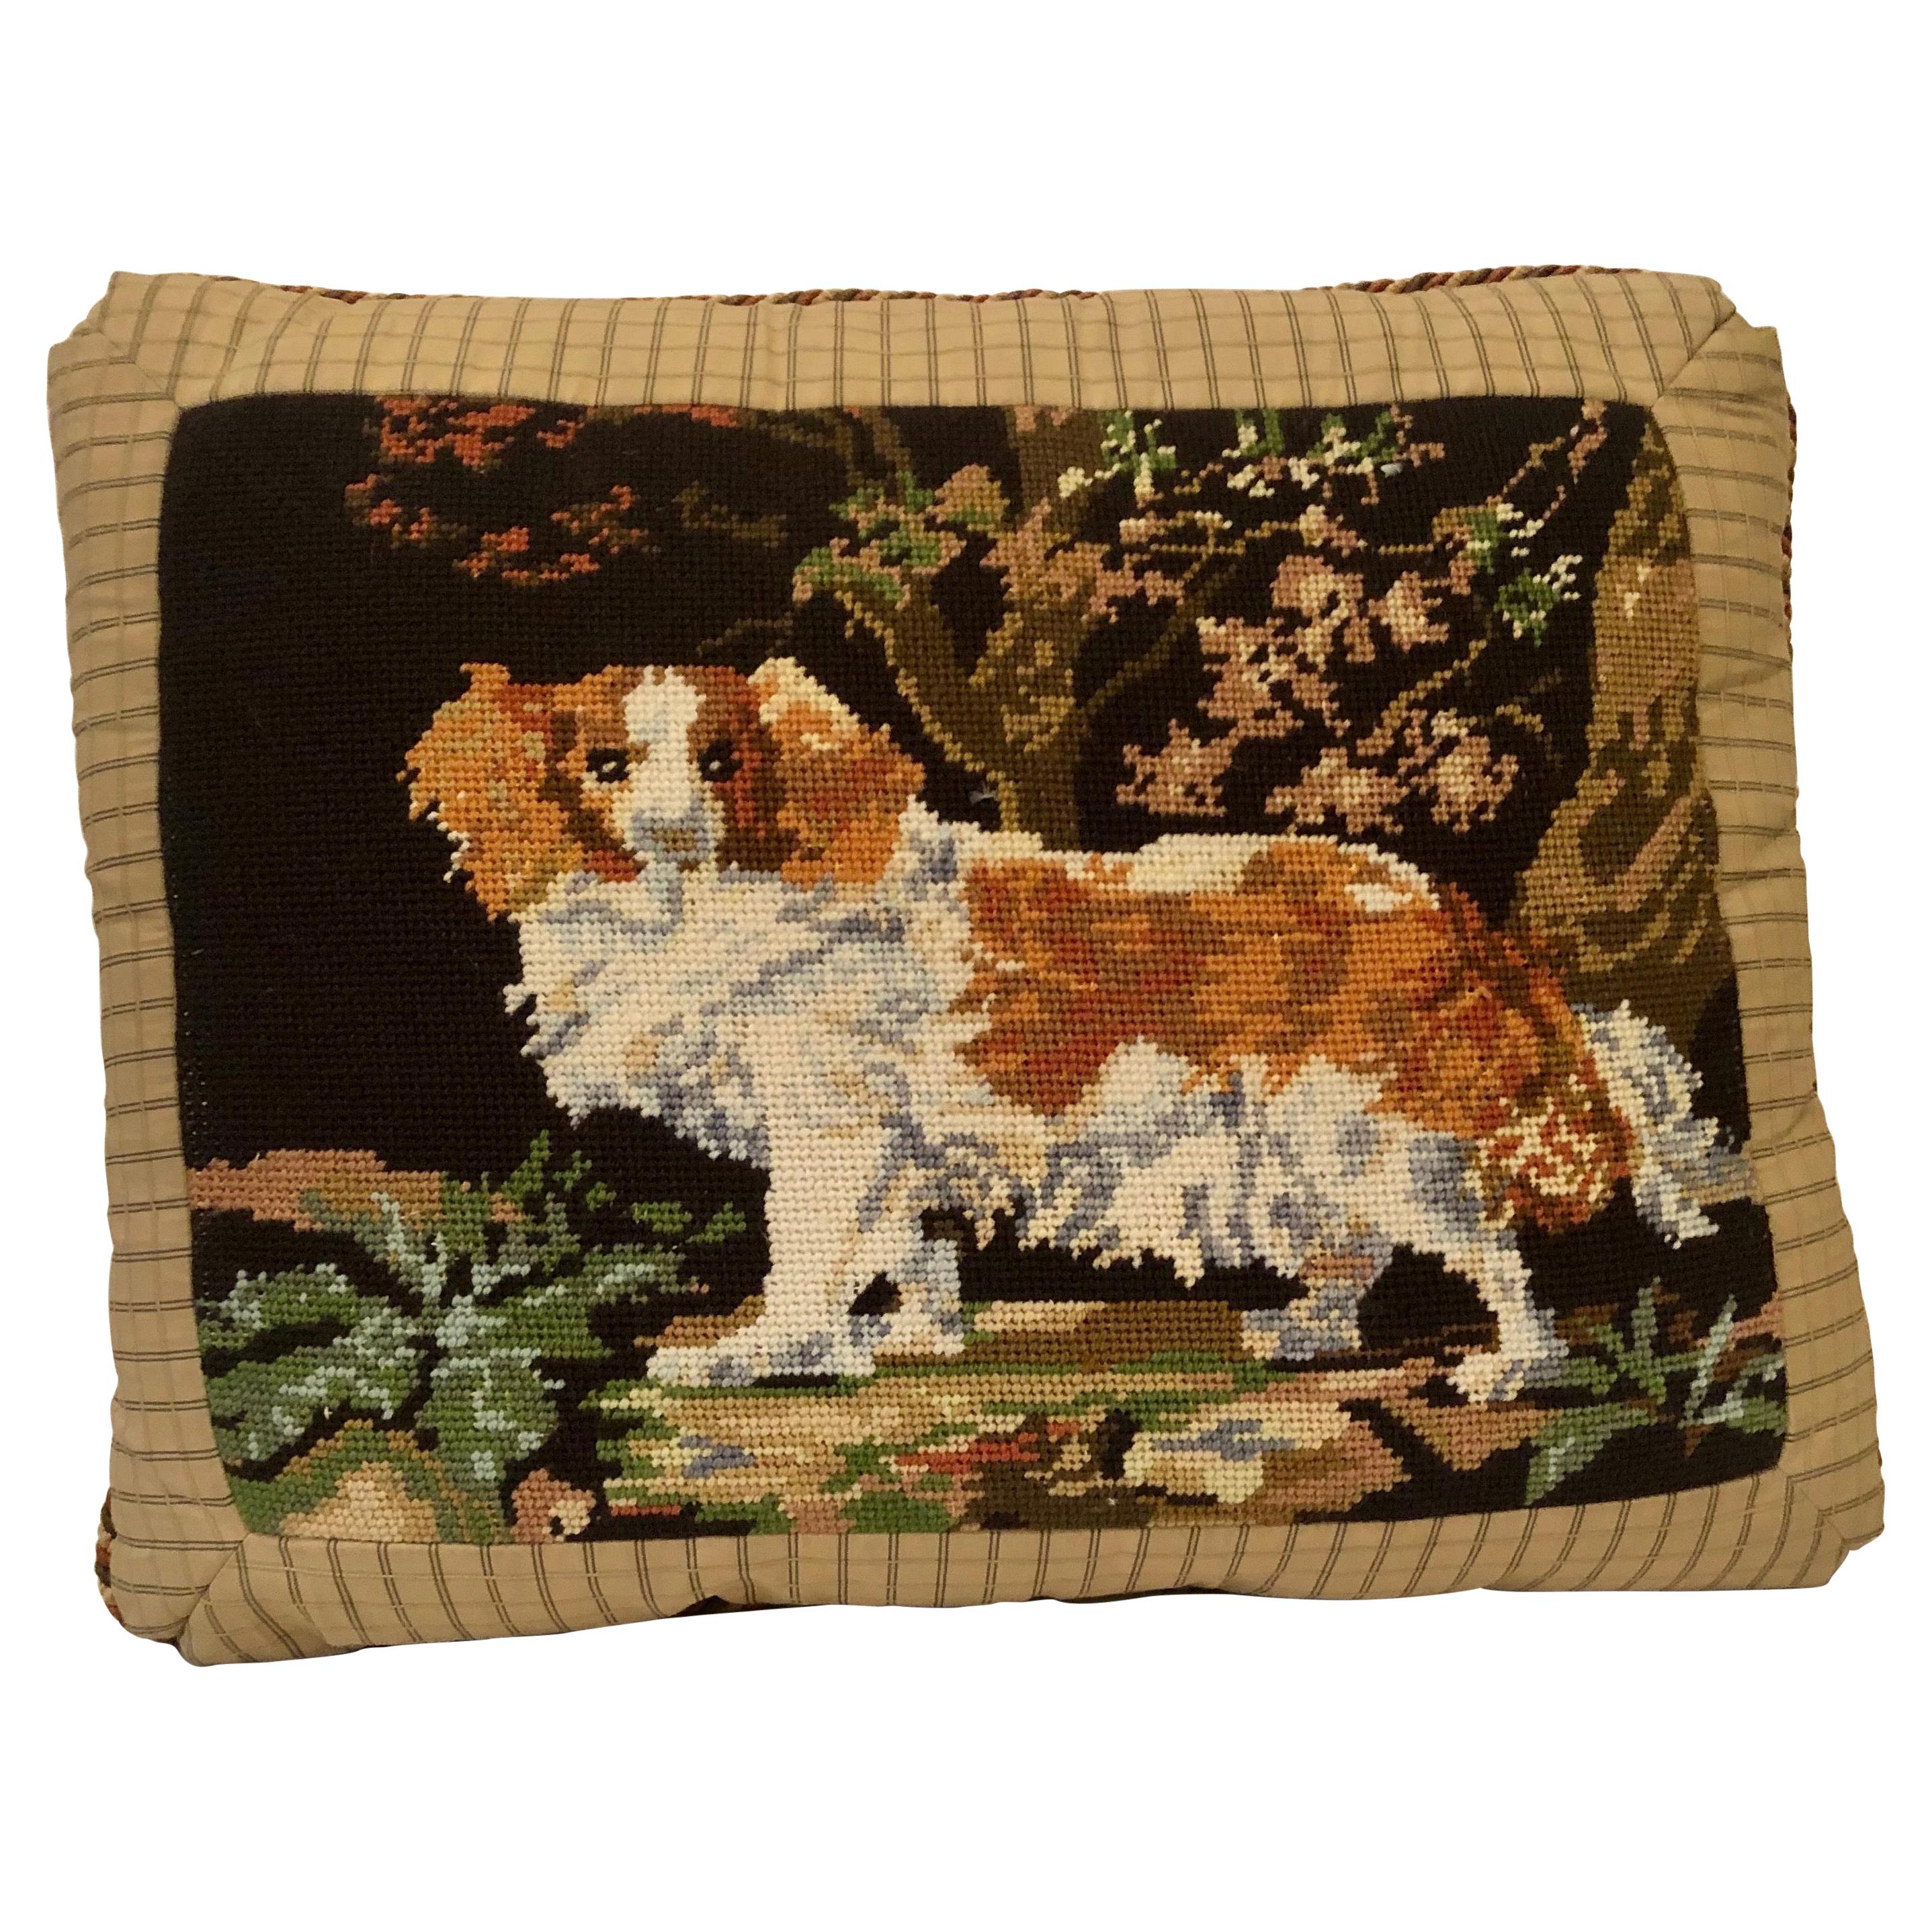 Needlepoint Pillow with King Charles Spaniel Playing in the Woods